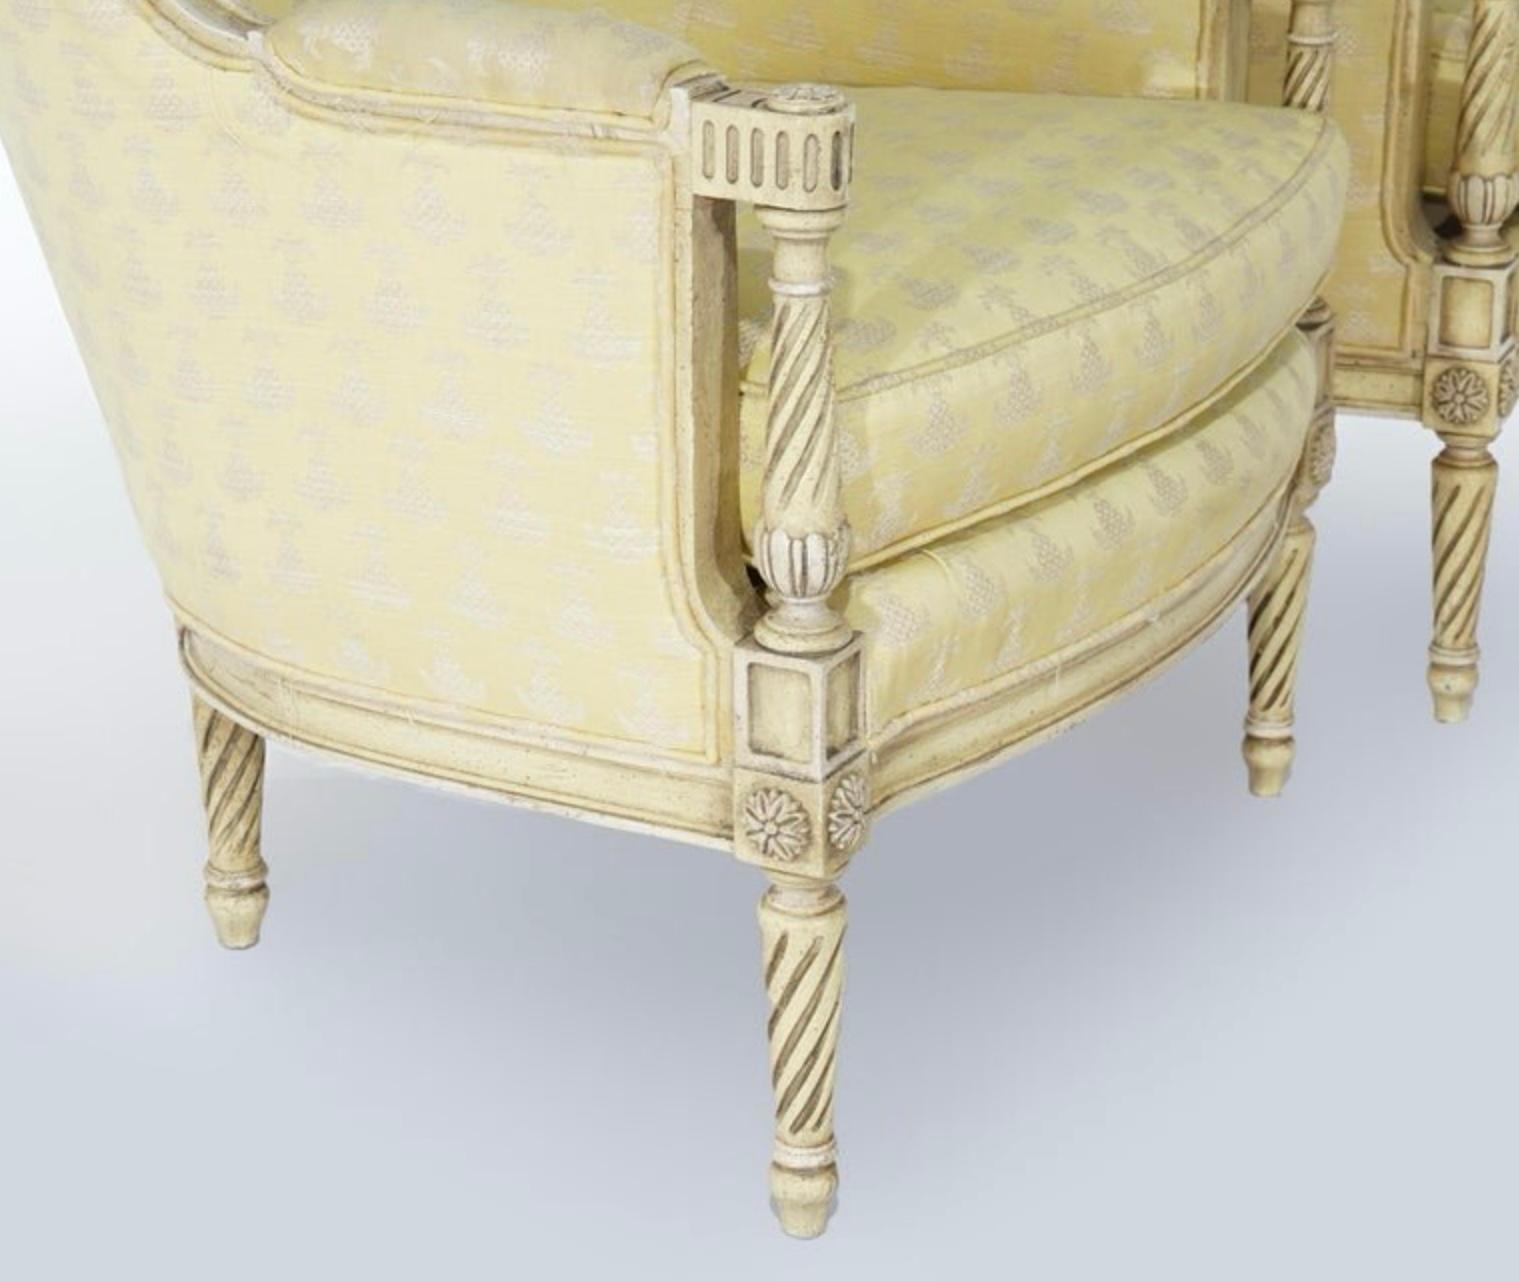 Upholstery 1950s French Louis XVI Style Carved And Painted Bergere Chairs - Pair For Sale